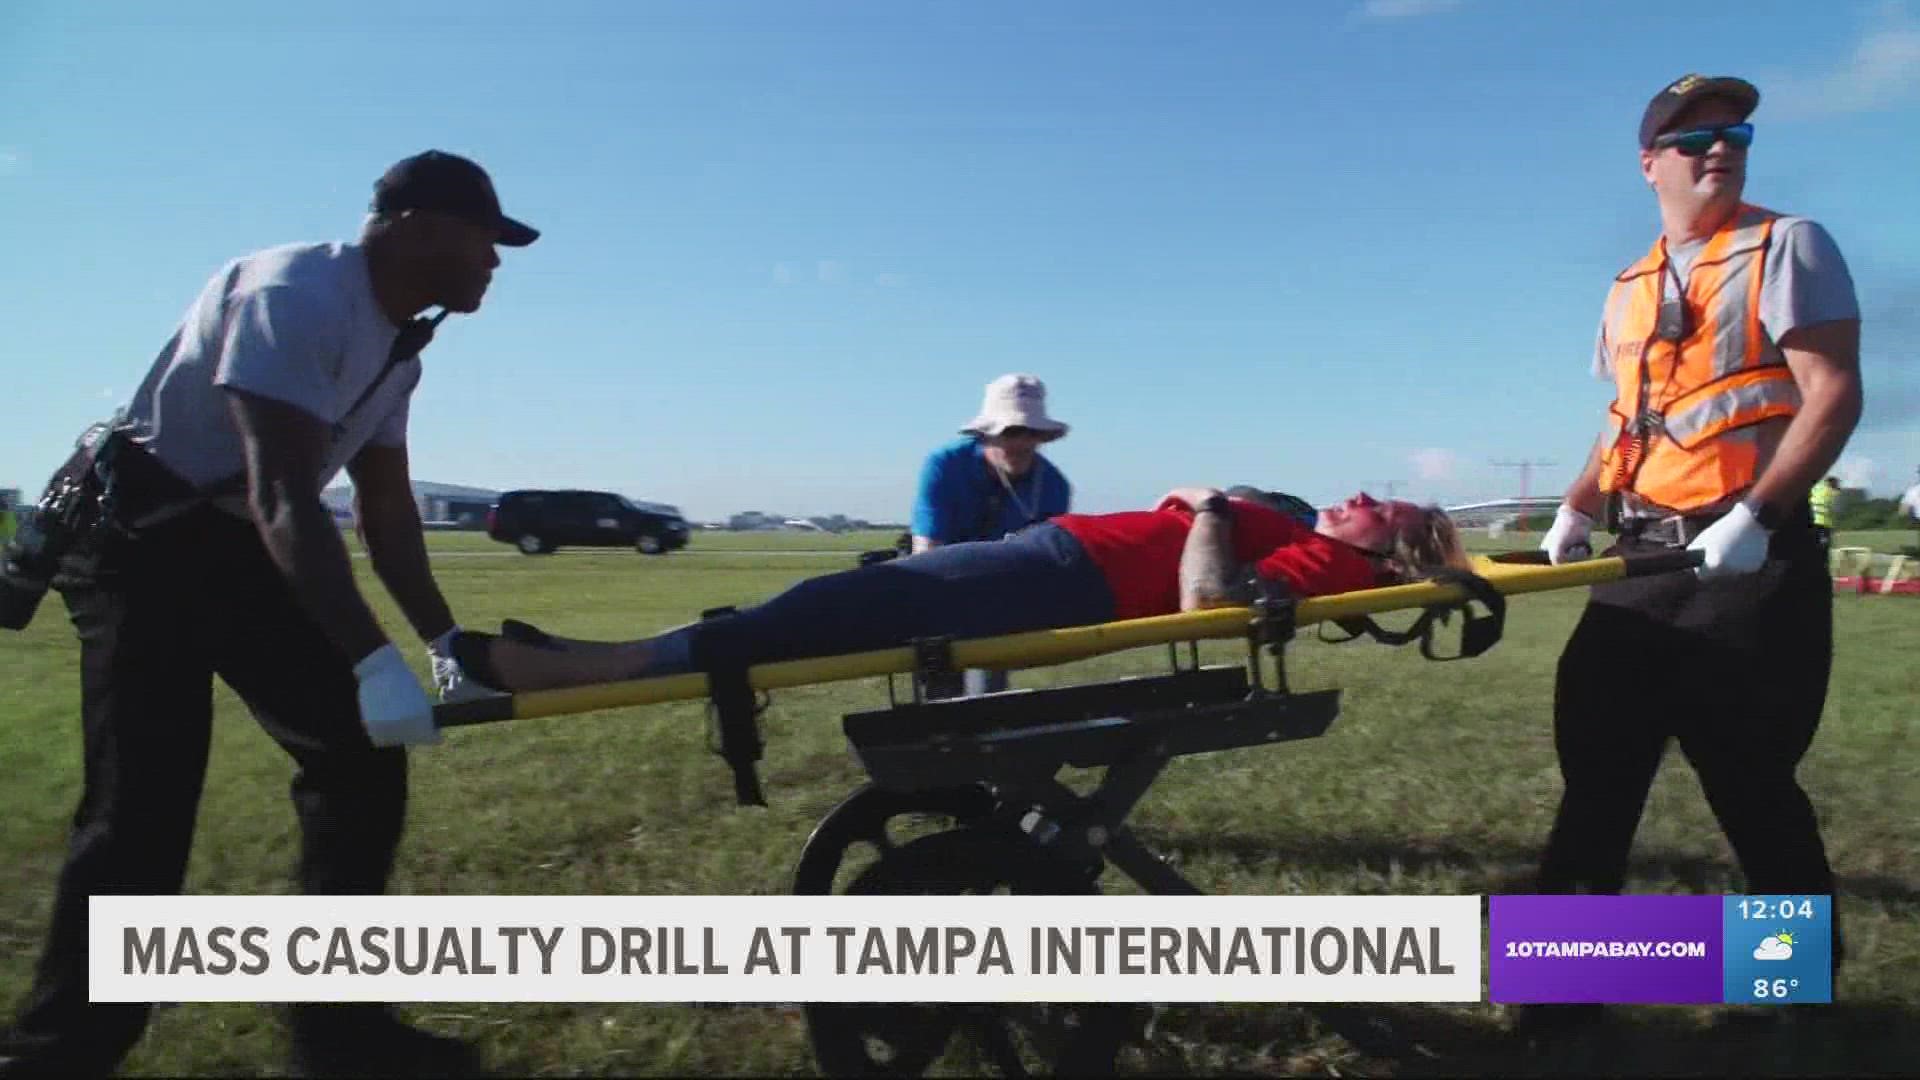 The exercise happened at Tampa International Airport's airfield.